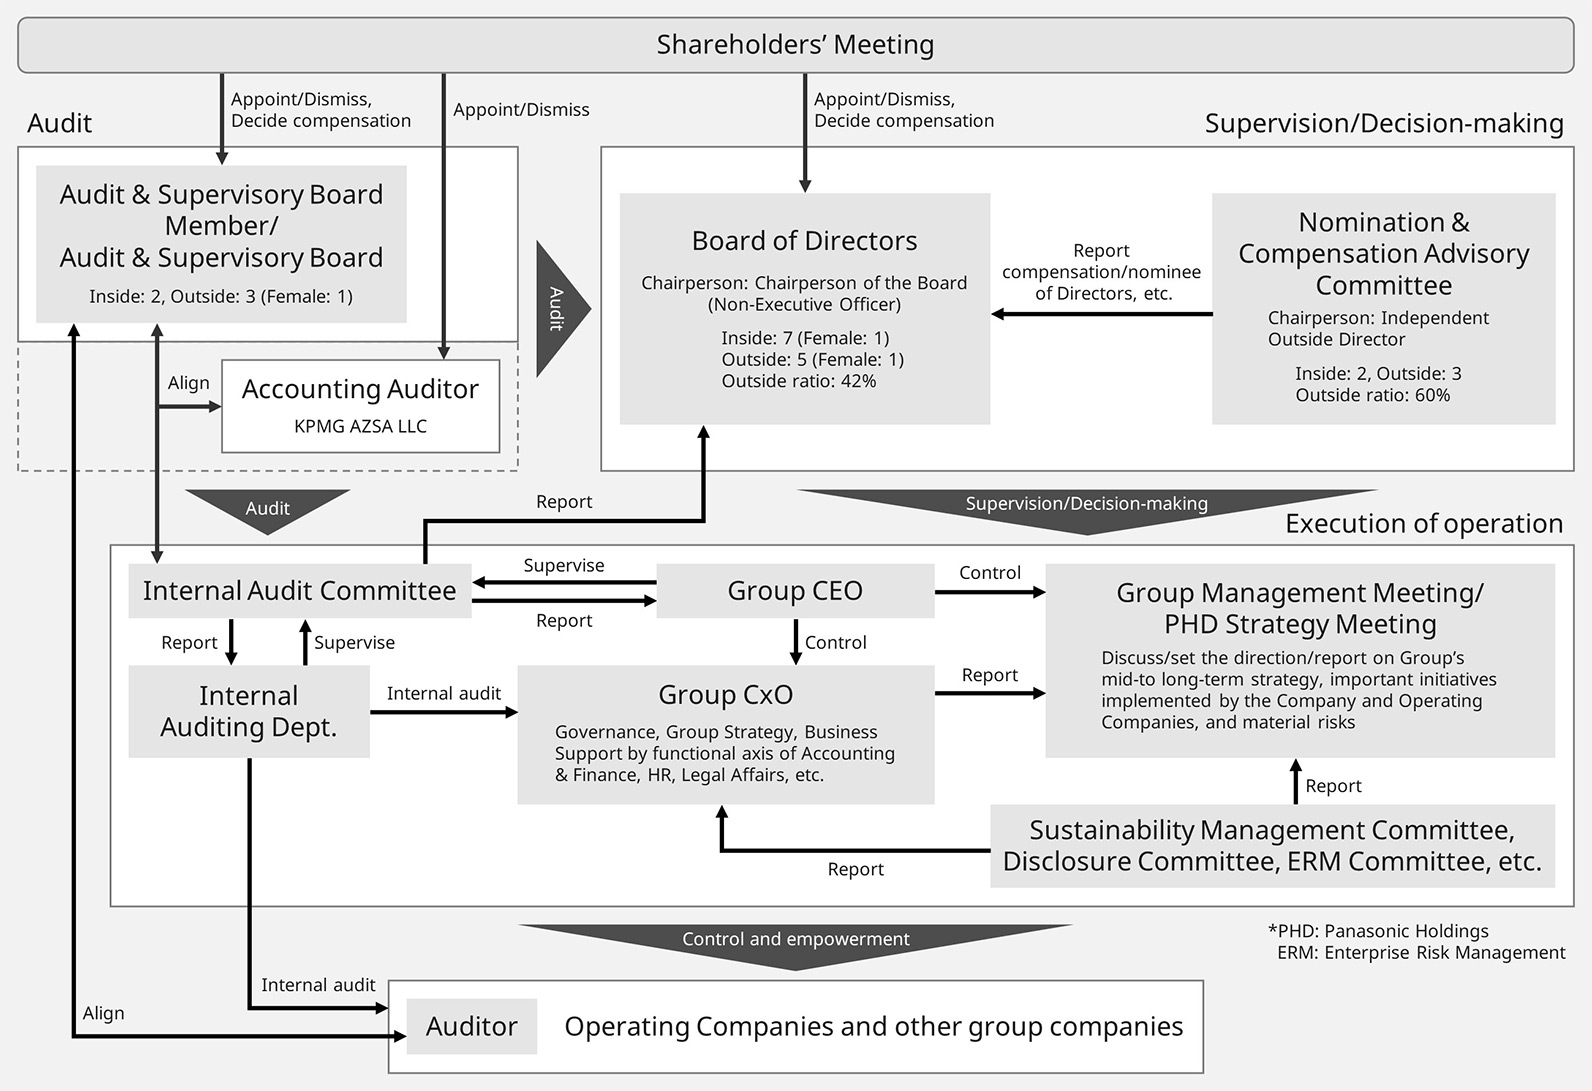 This is Panasonic Holdings Corporate Governance Structure. The Corporate Strategy Division, the Professional Business Support Division, and the Innovation Promotion Division are all directly under the Board of Directors and the President. They all work collaboratively with each company and division within the Group through the Group Strategy Council. Additionally, there are meetings of the Environmental Management Committee, as well as committees and working groups tasked with specific promotional systems, which enables collaborative promotion.